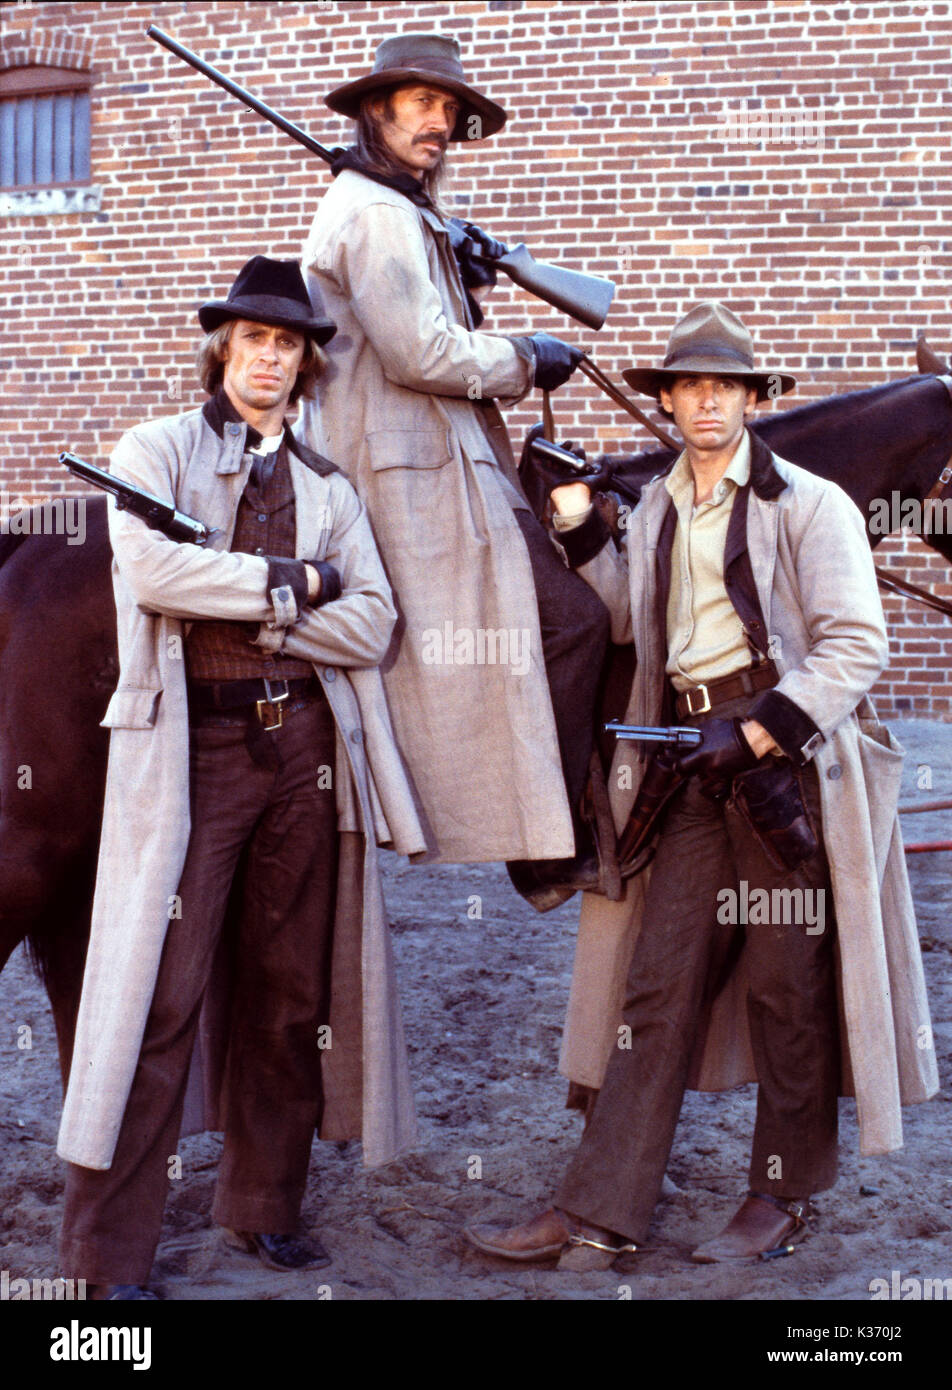 THE LONG RIDERS UNITED ARTISTS L-R, KEITH, DAVID AND ROBERT CARRADINE   THE LONG RIDERS UNITED ARTISTS L-R, KEITH, DAVID AND ROBERT CARRADINE     Date: 1980 Stock Photo